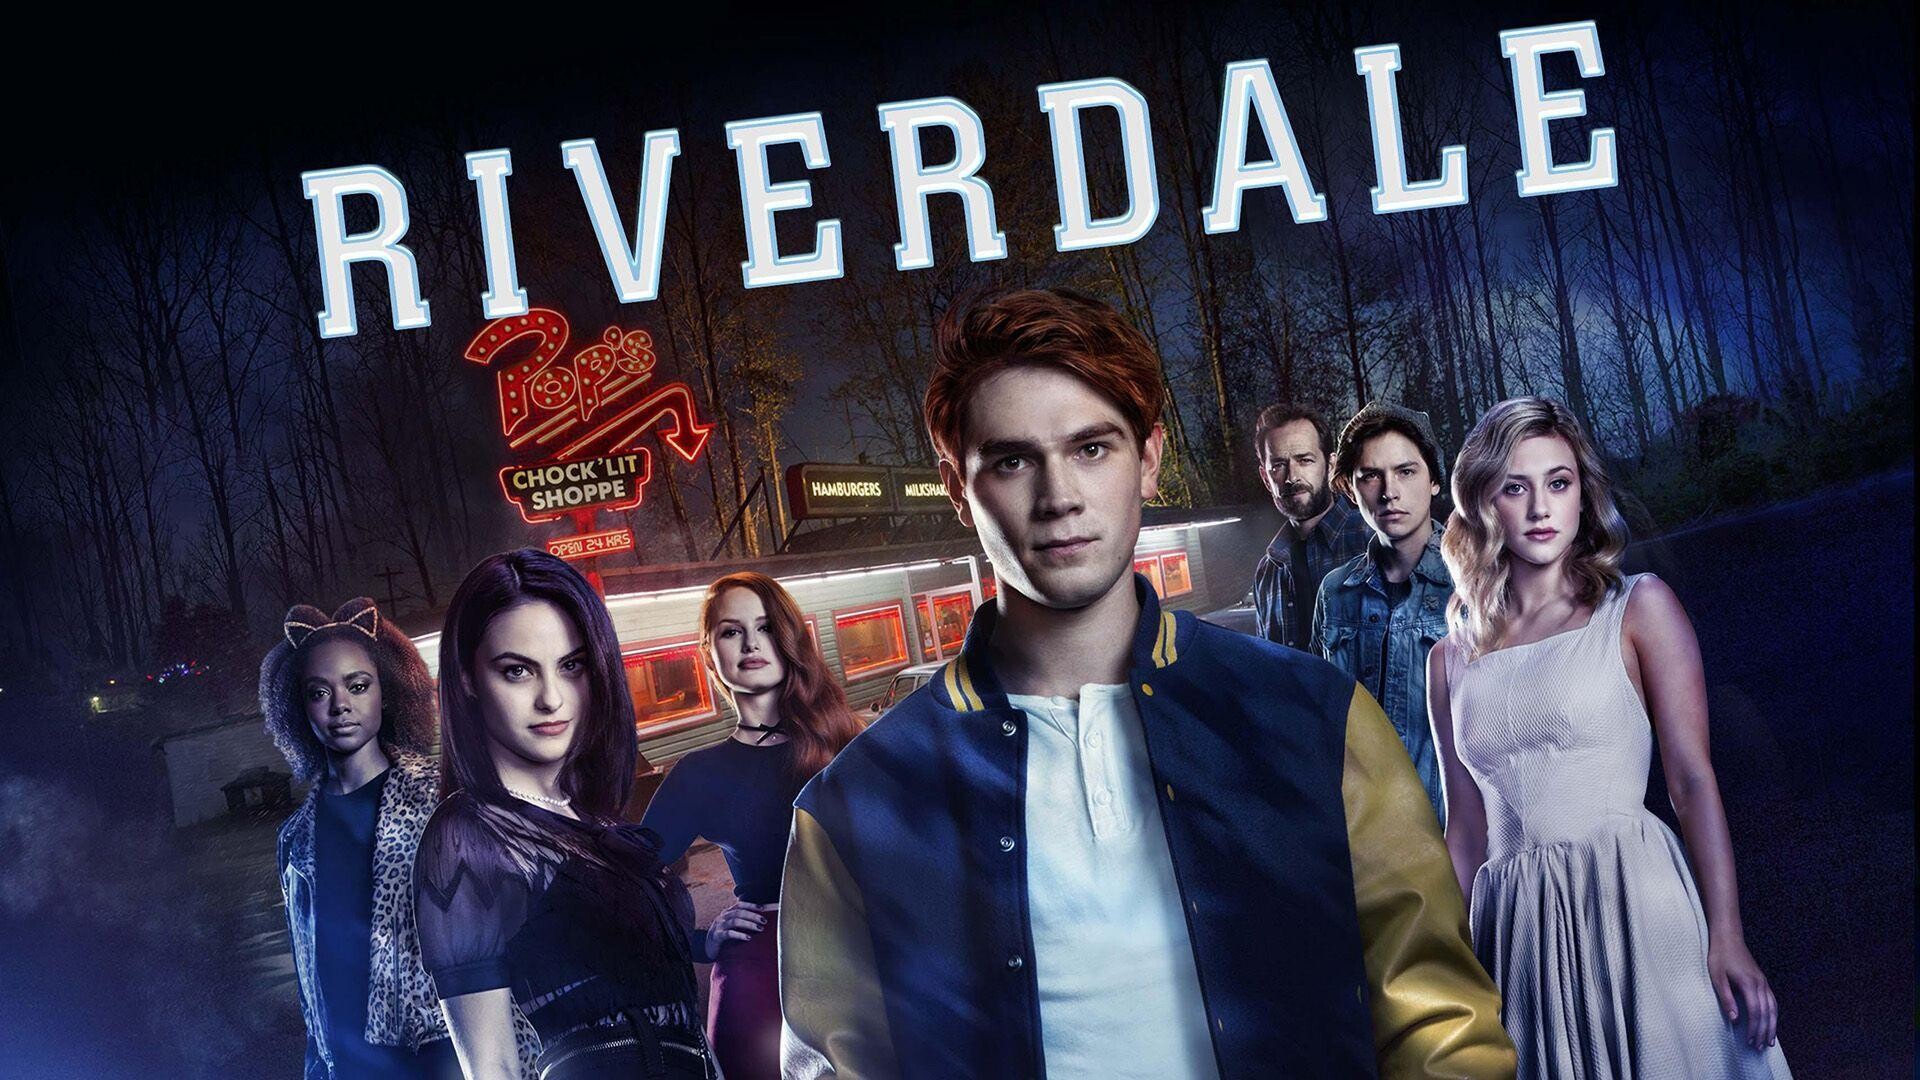 Riverdale (TV Series): Pop's, KJ Apa as Archie Andrews, A former high school football player who has a passion for music. 1920x1080 Full HD Background.